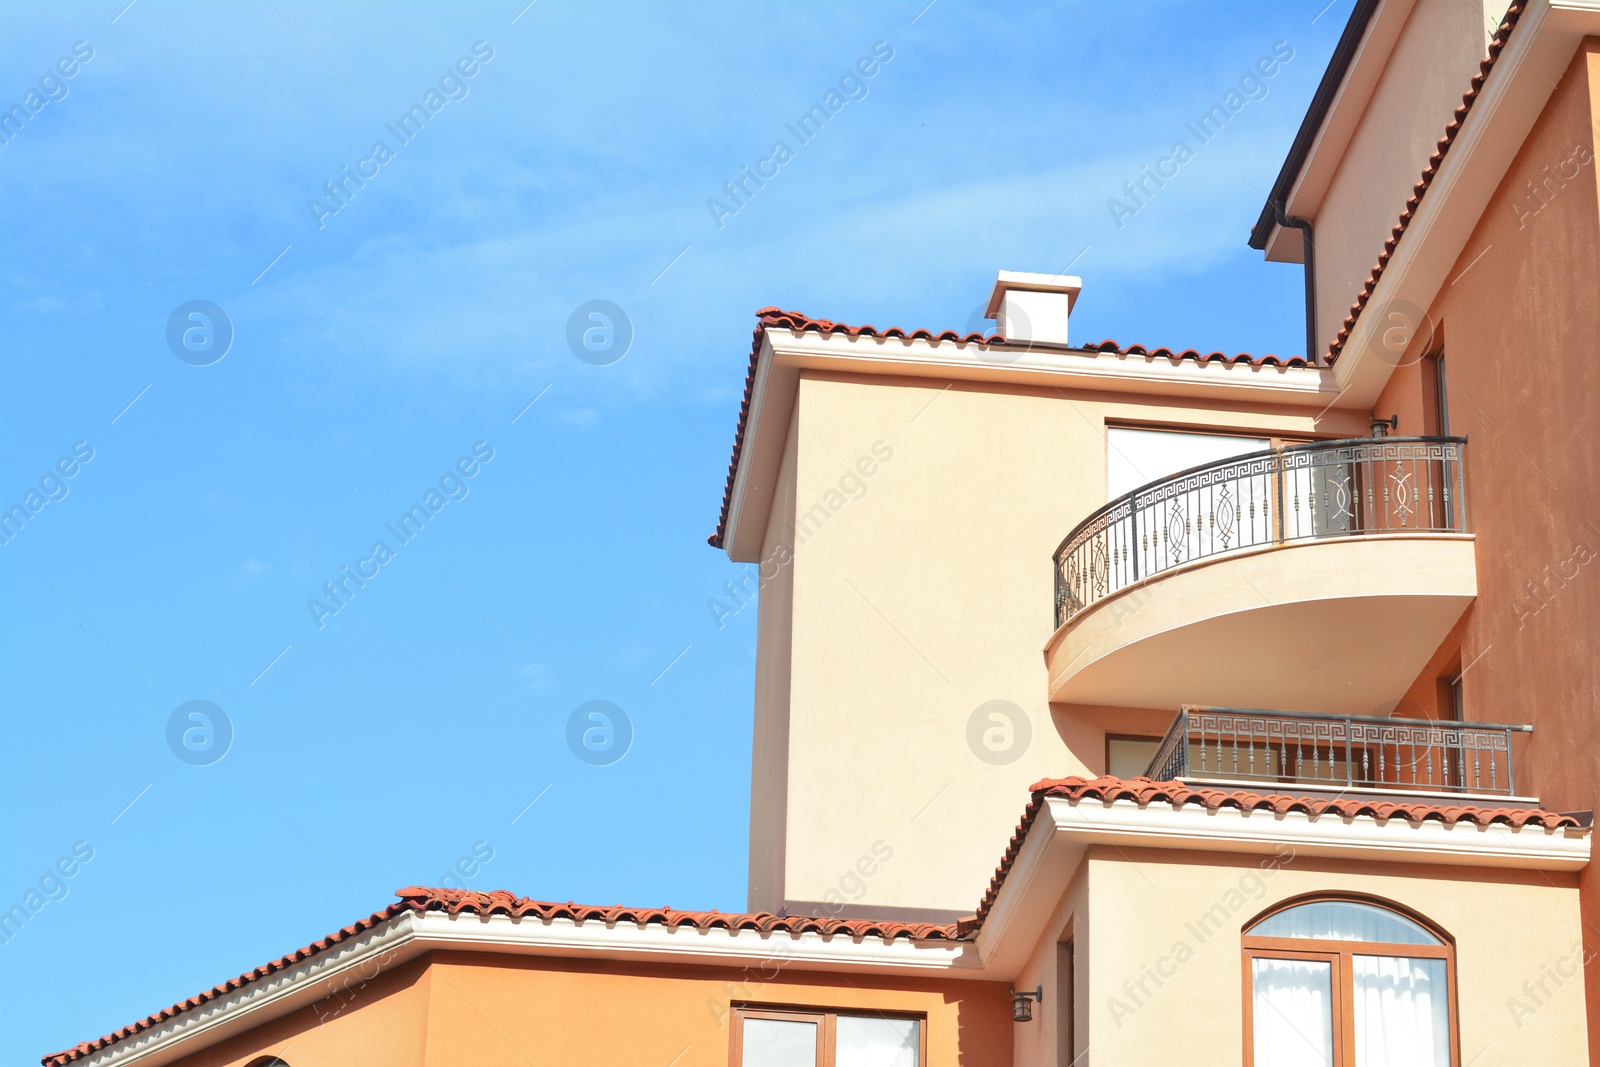 Photo of Exteriorbeautiful residential buildings with balconies against blue sky